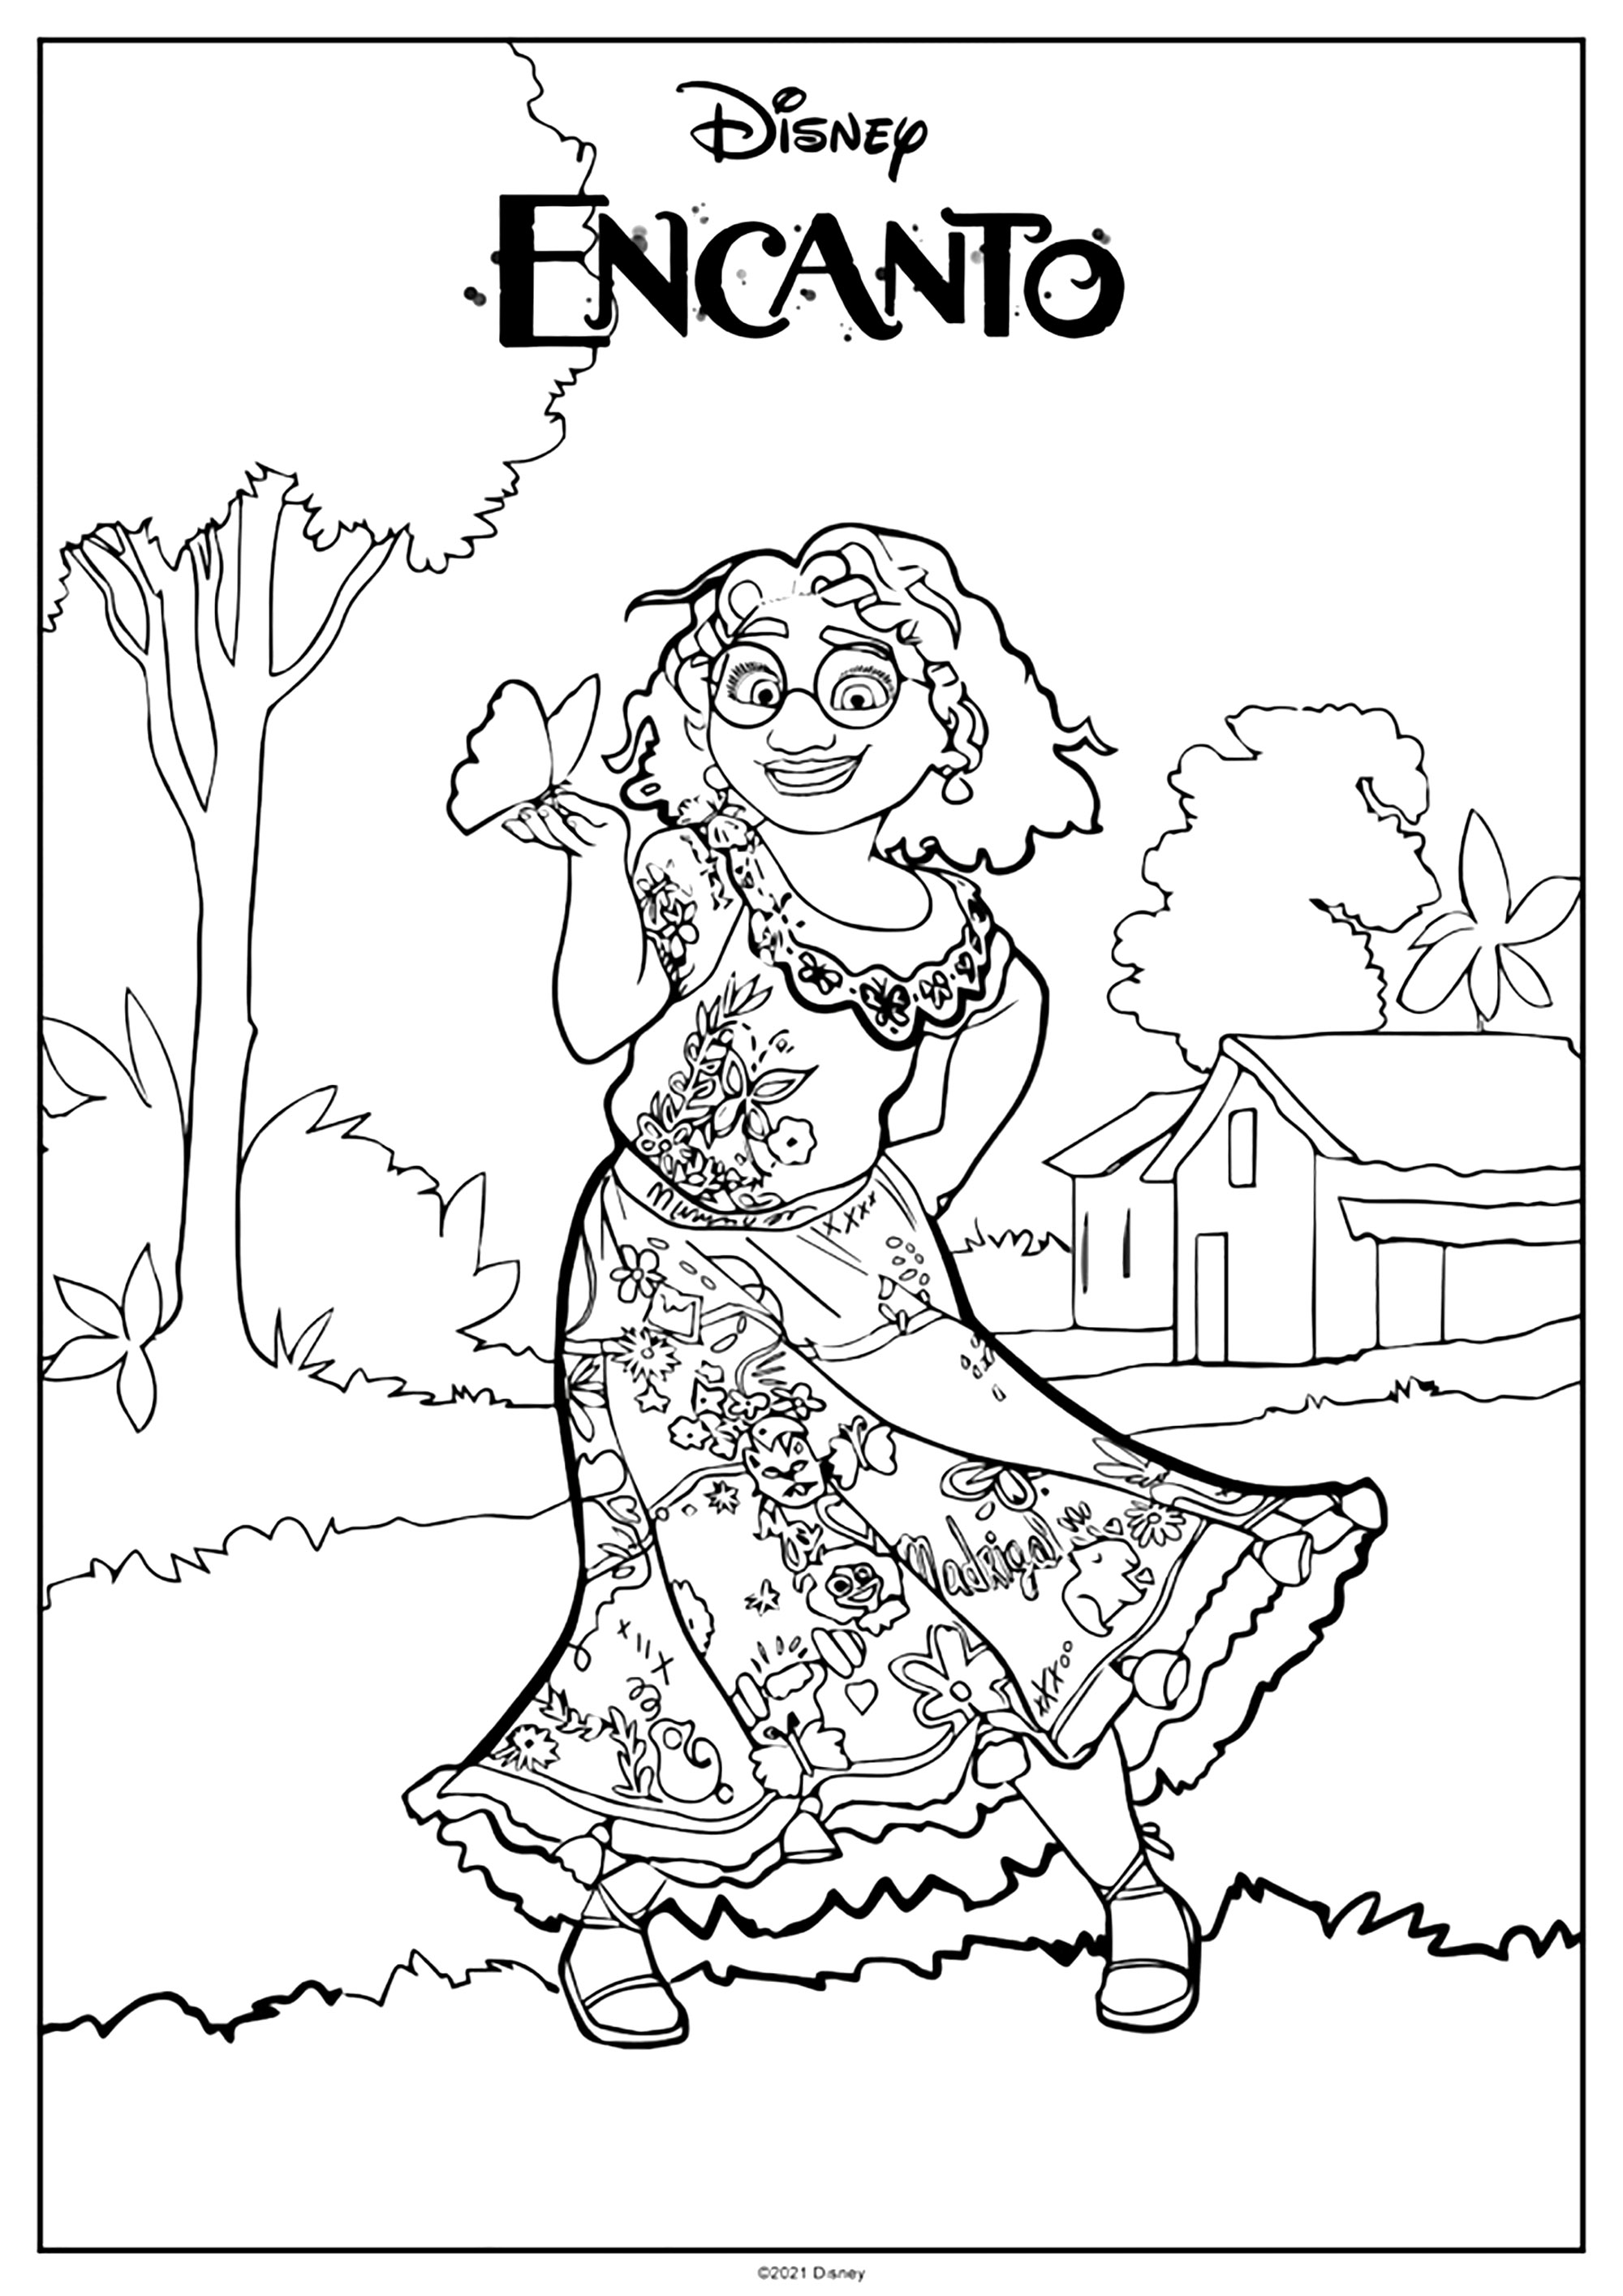 Encanto coloring page: Mirabel and a pretty butterfly